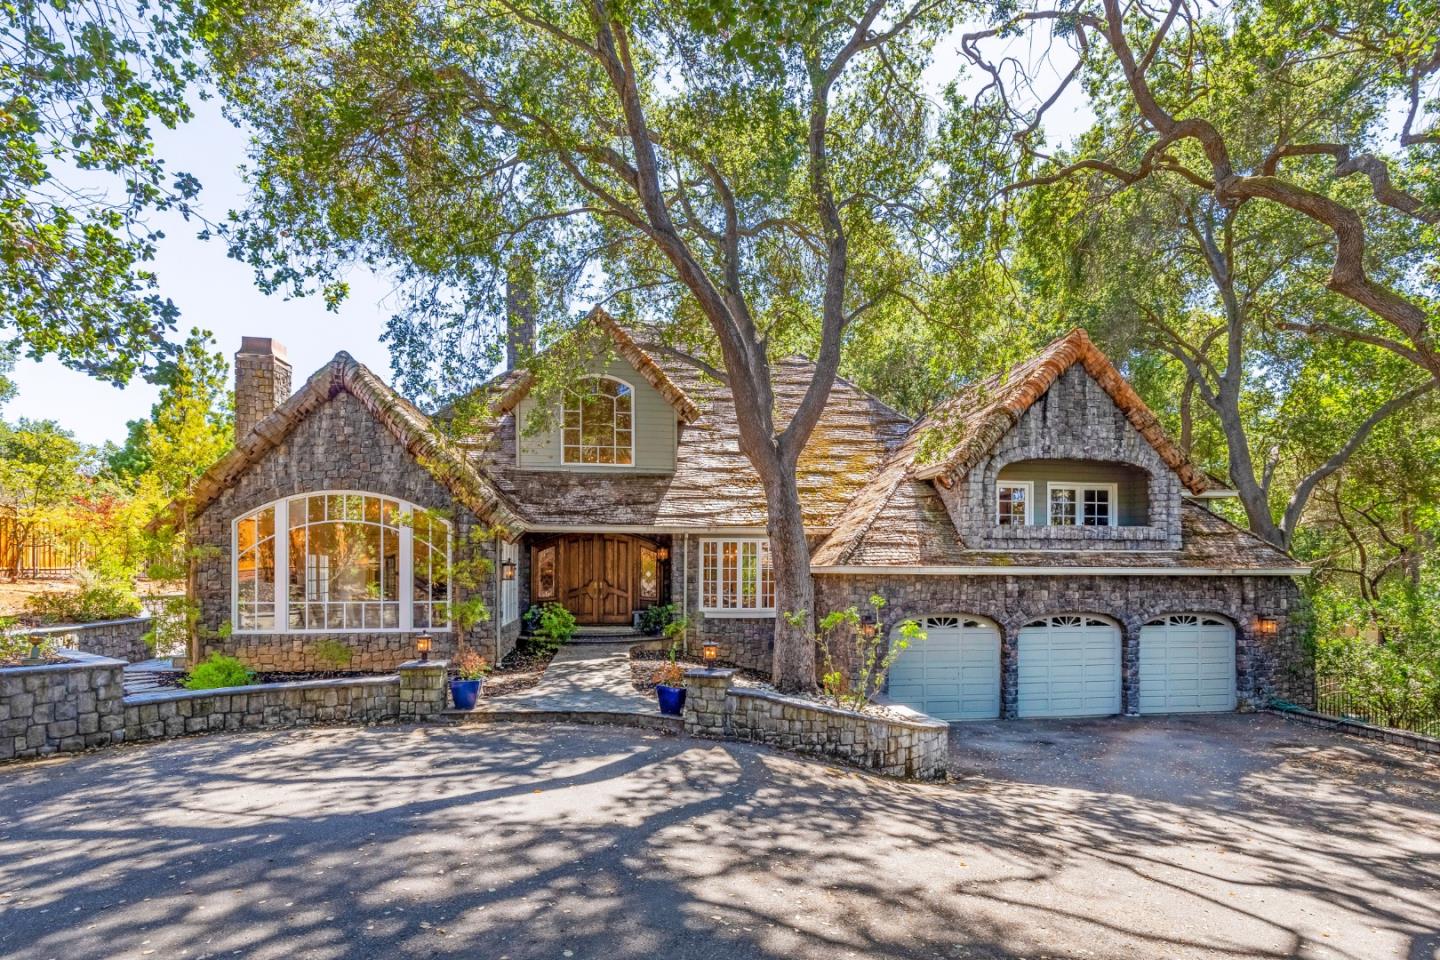 Photo of 18540 Bicknell Rd in Monte Sereno, CA